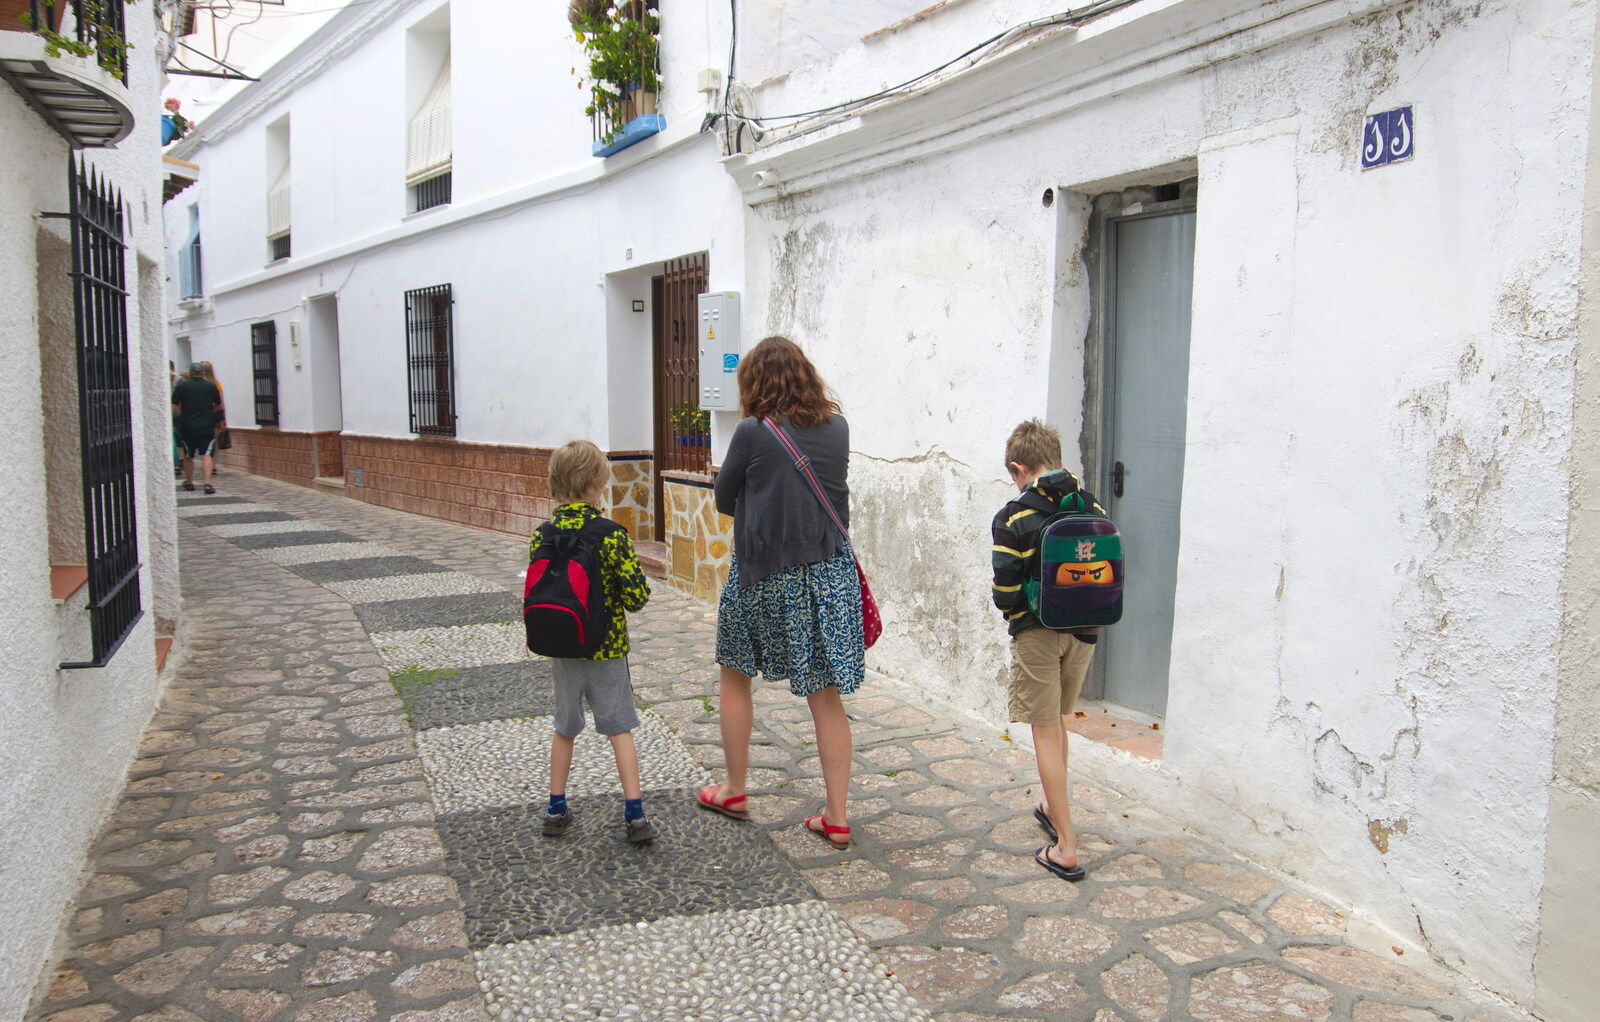 Wandering the back alleys from Torrecilla Beach and the Nerja Museum, Andalusia, Spain - 17th April 2019